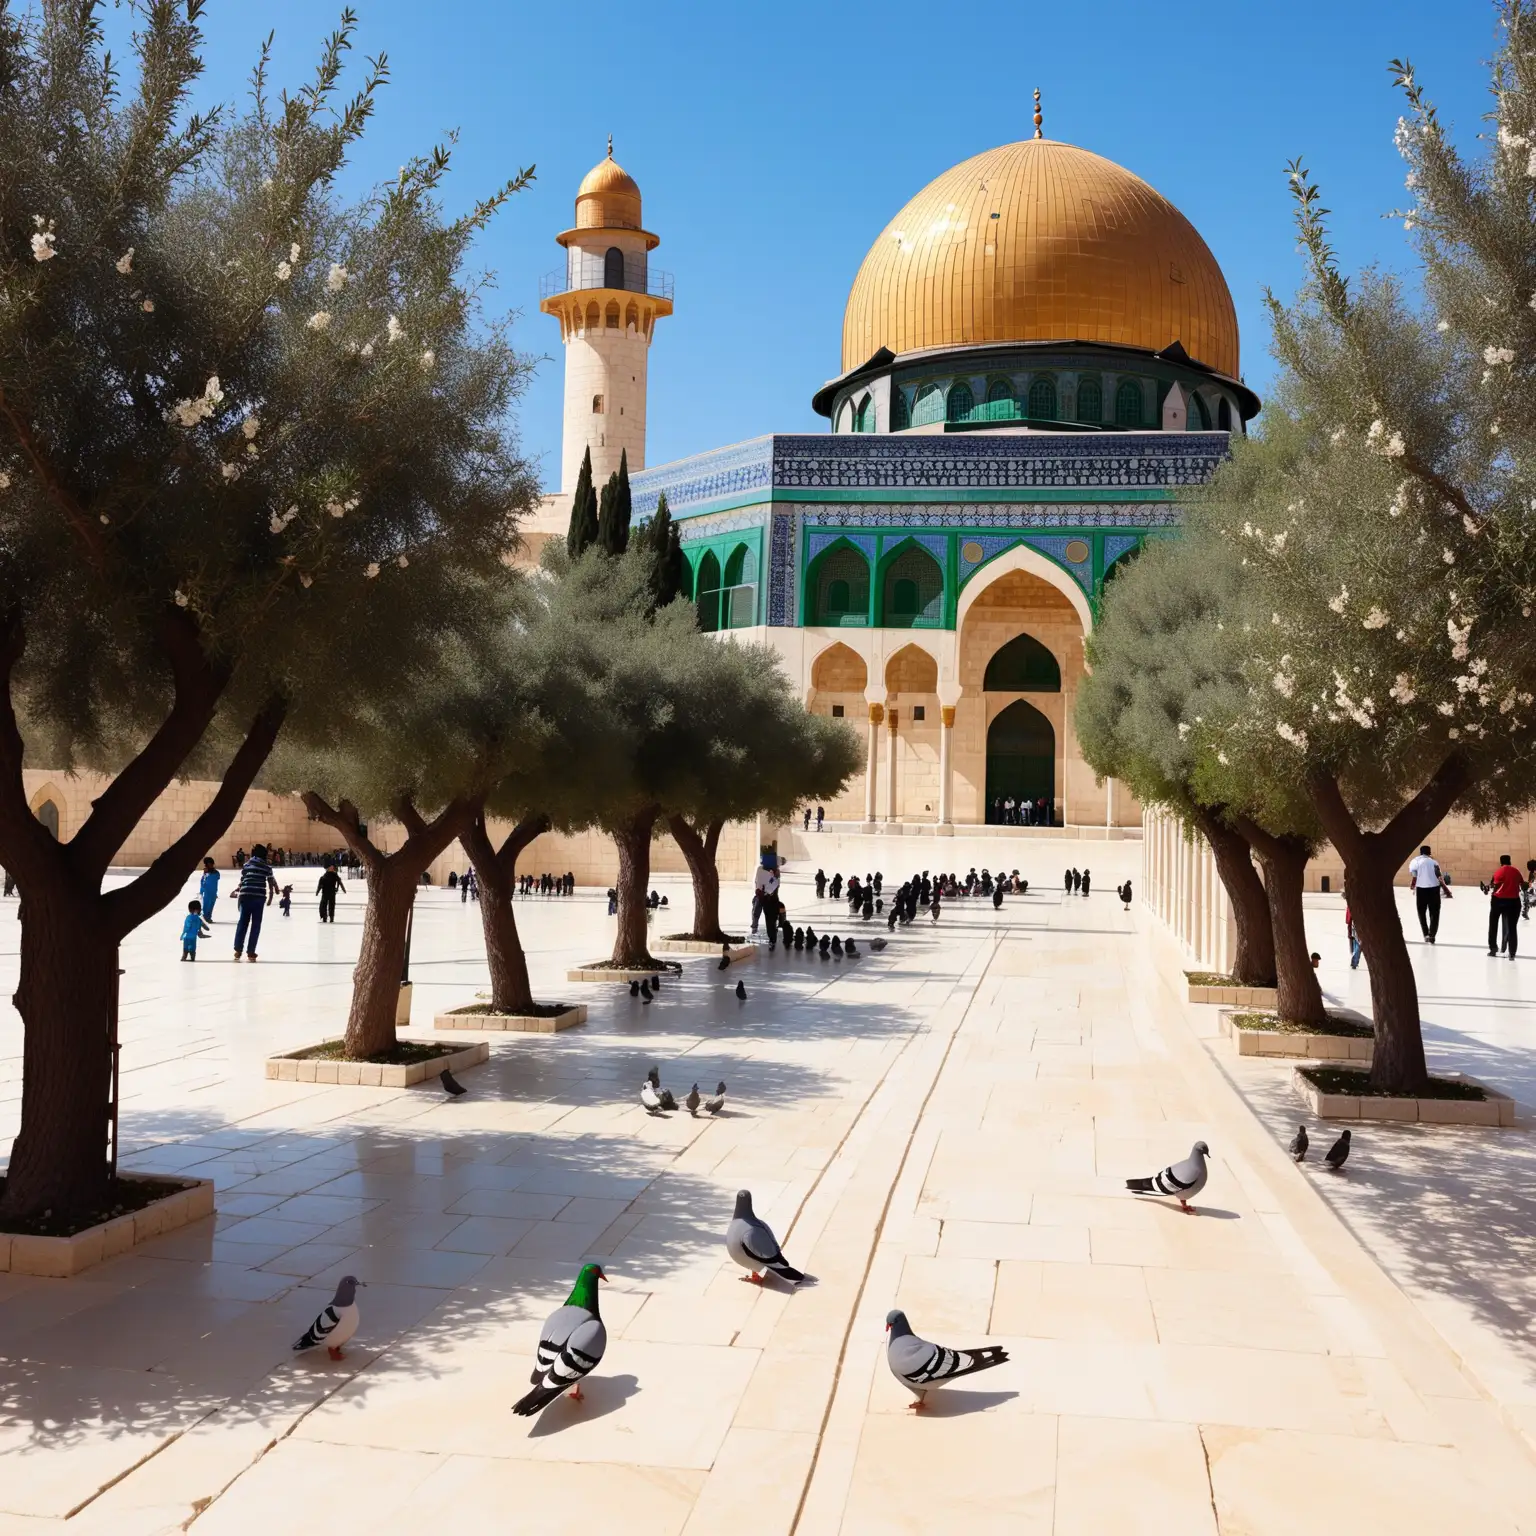 Joyful Children Playing Amidst Olive Trees in AlAqsa Mosque